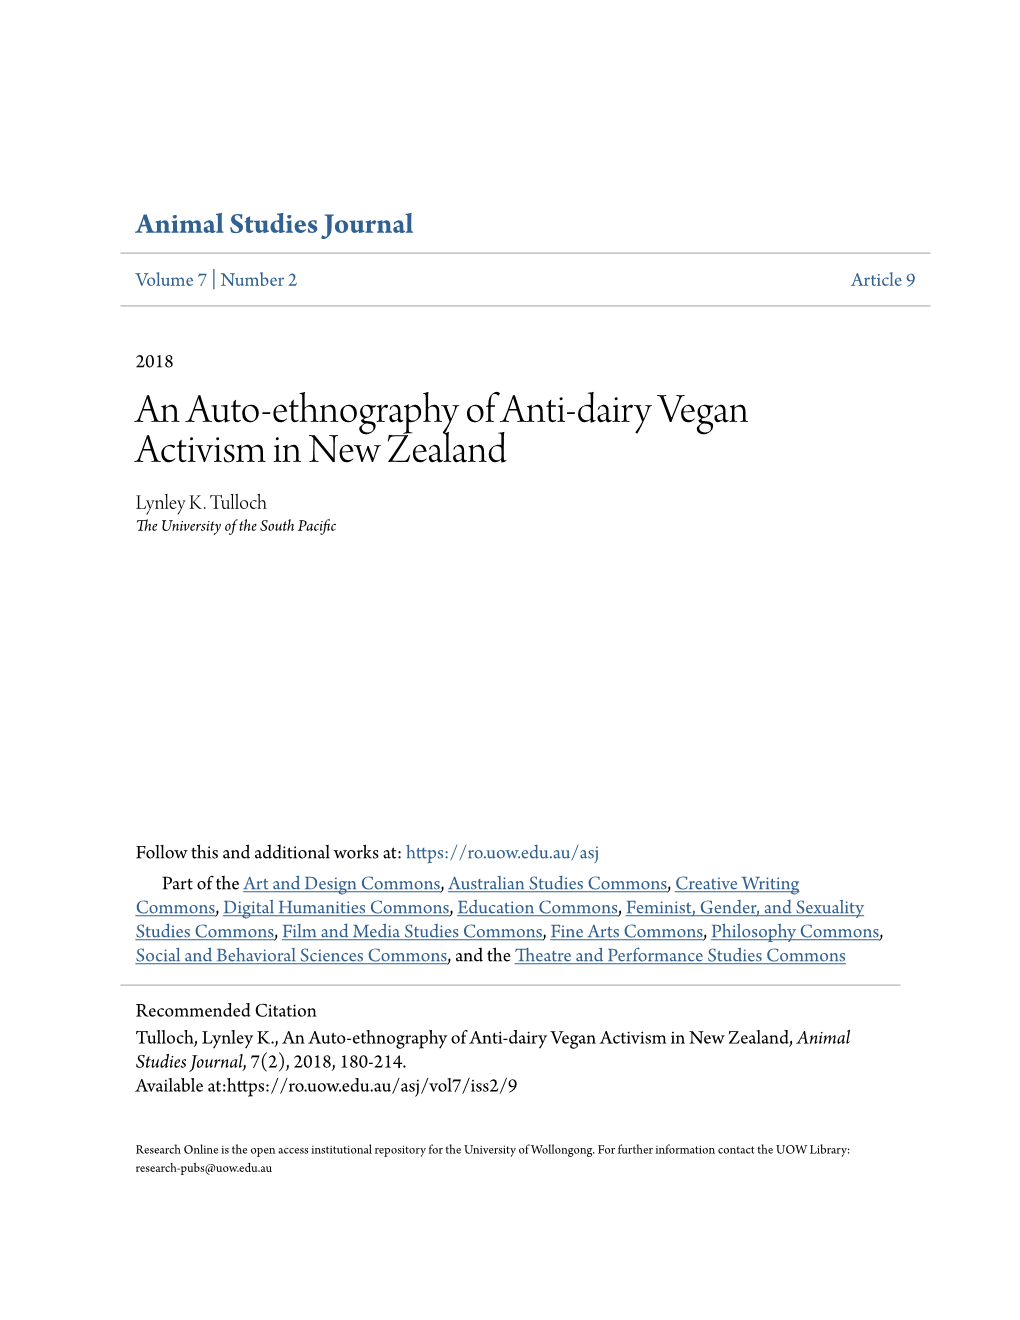 An Auto-Ethnography of Anti-Dairy Vegan Activism in New Zealand Lynley K